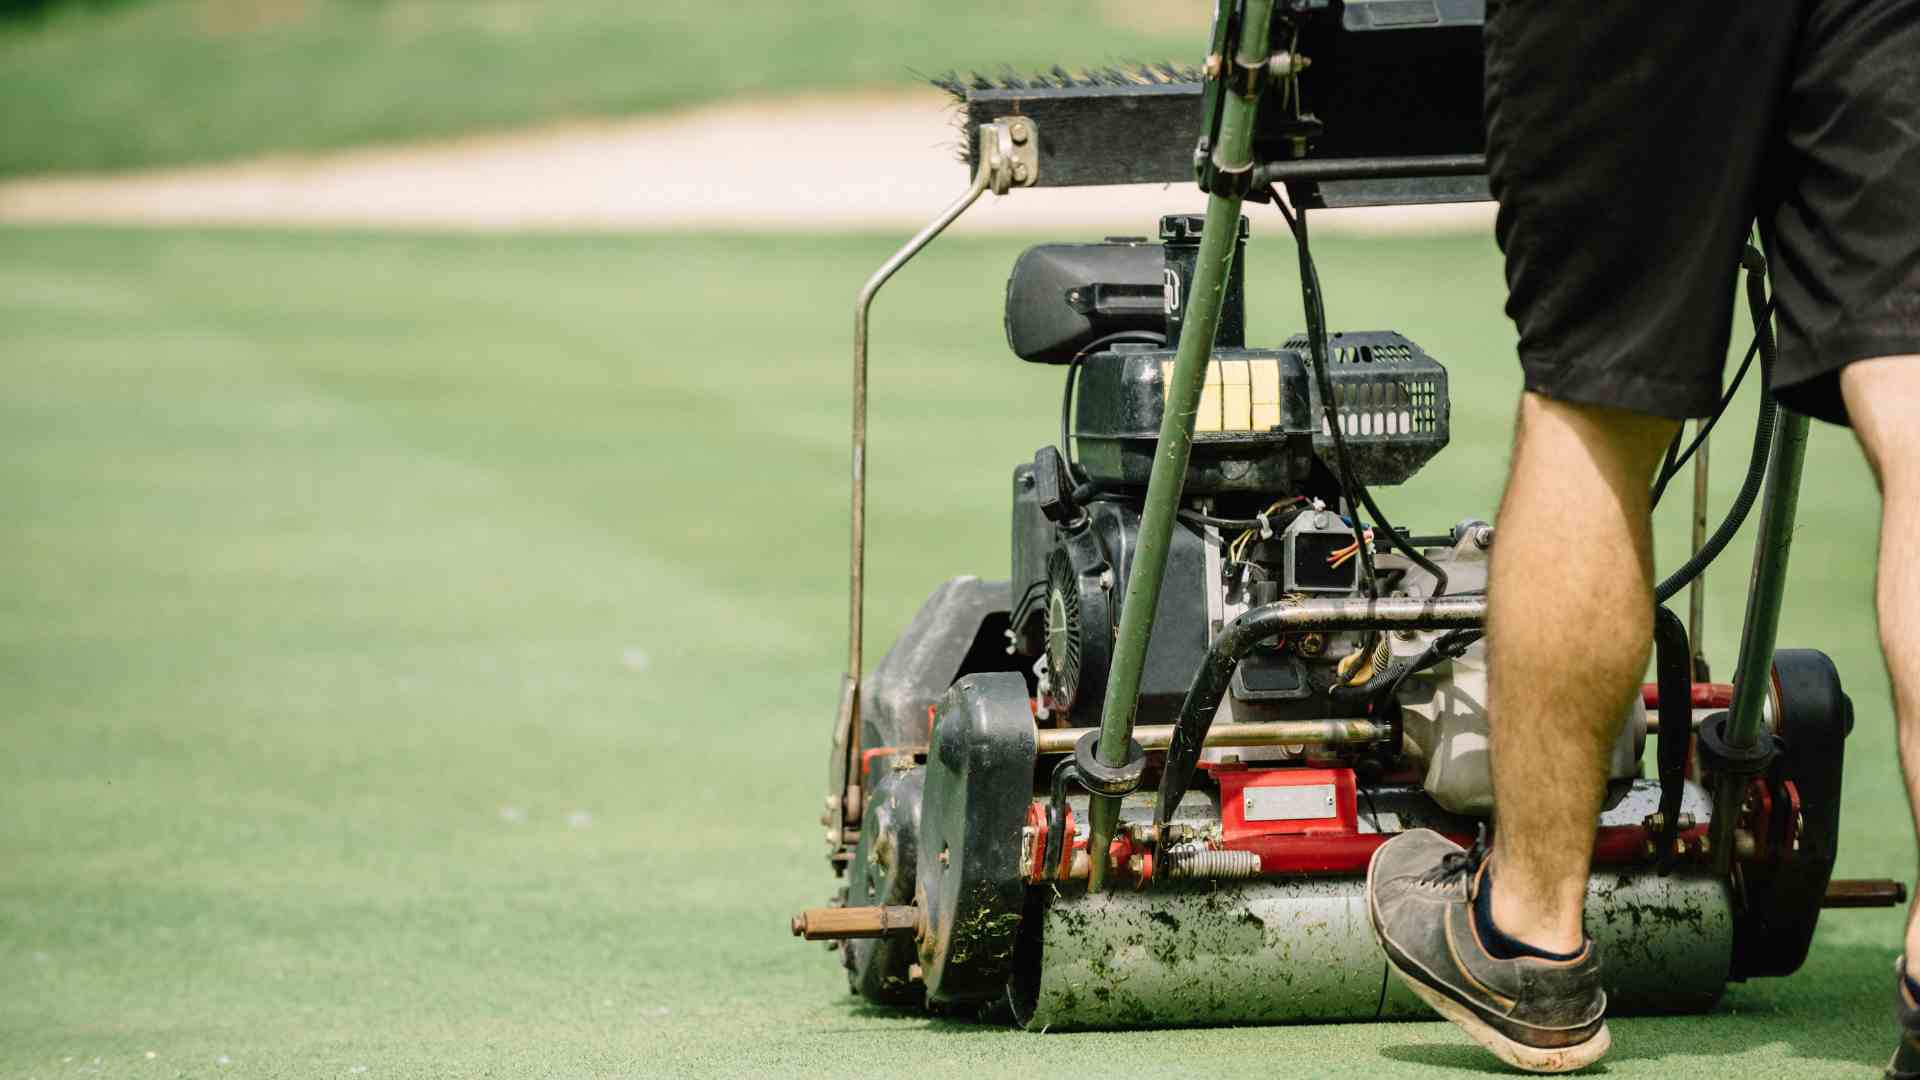 Close up of a man using a compact lawn mower to maintain a golf course green